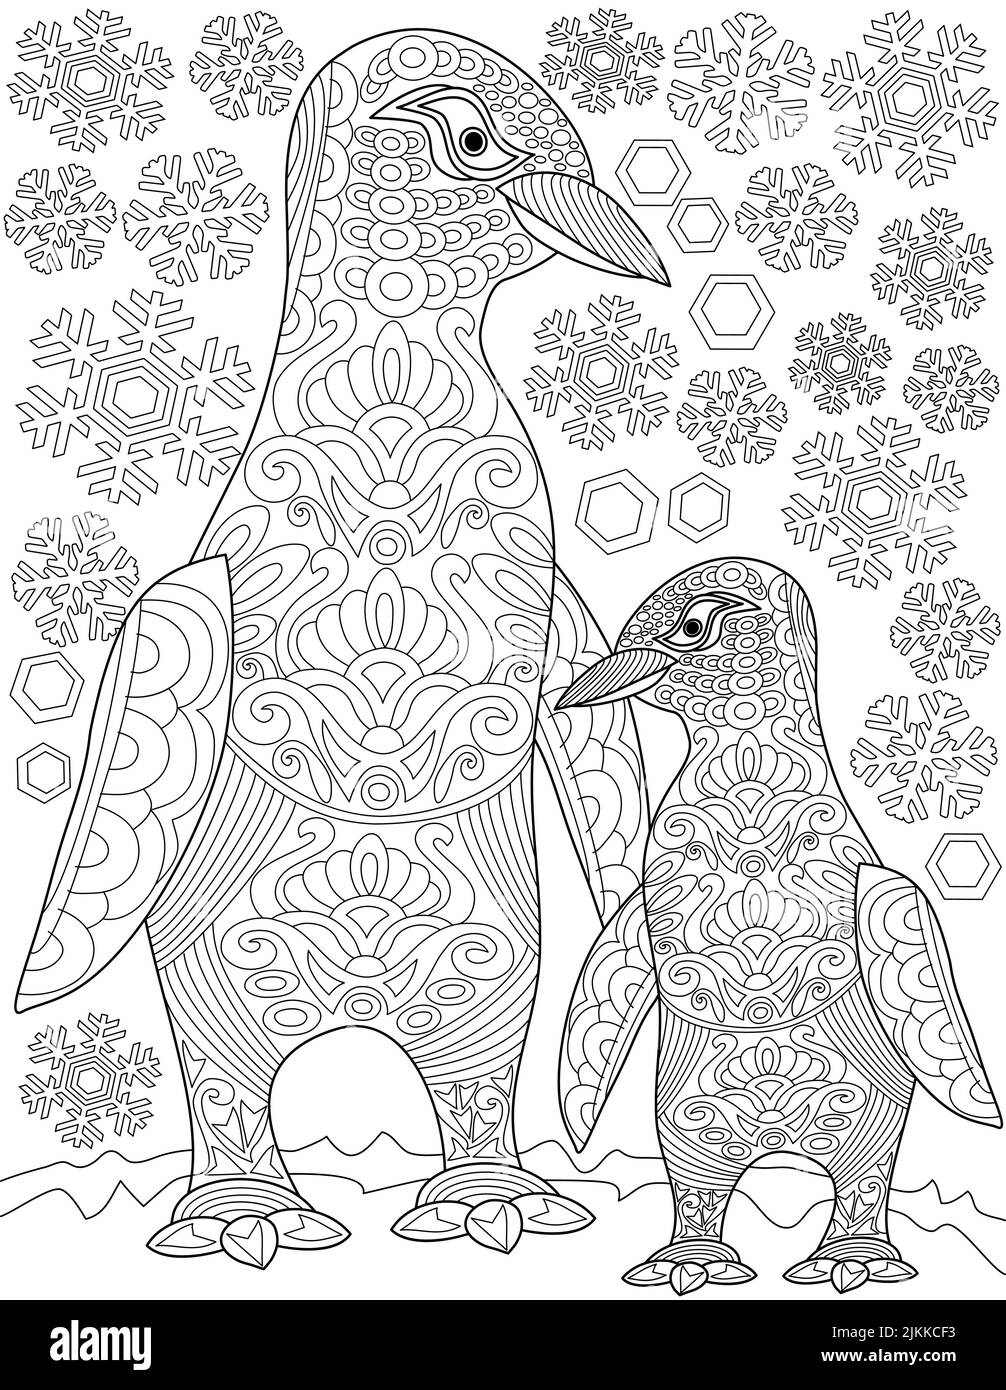 Coloring Book Page With Walking Mother And Kid Penguin With Snowflakes In Background. Sheet To Be Colored With Two Happy Sea Birds Next To One Another Stock Vector